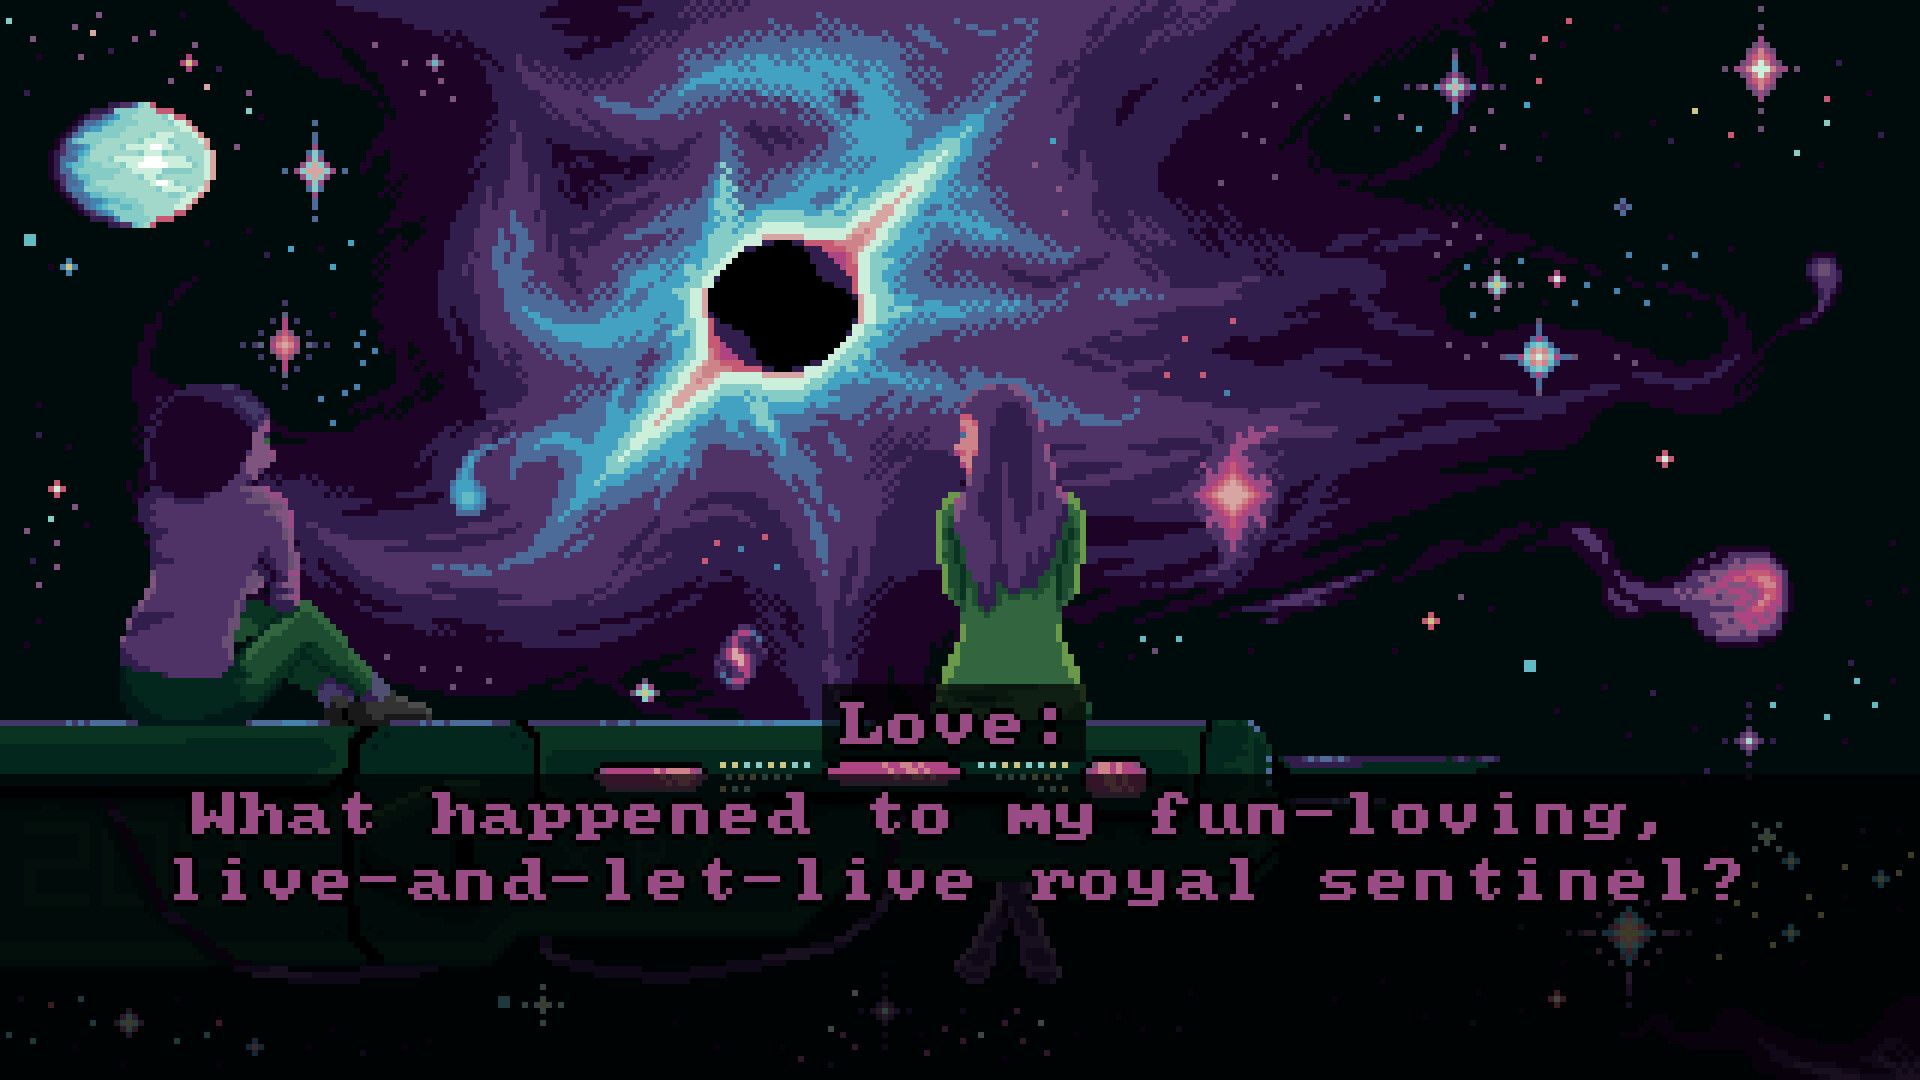 Screenshot of the game. Two women look out over a galaxy. Text reads "Love: What happened to my fun-loving live-and-let-live royal sentinel?"